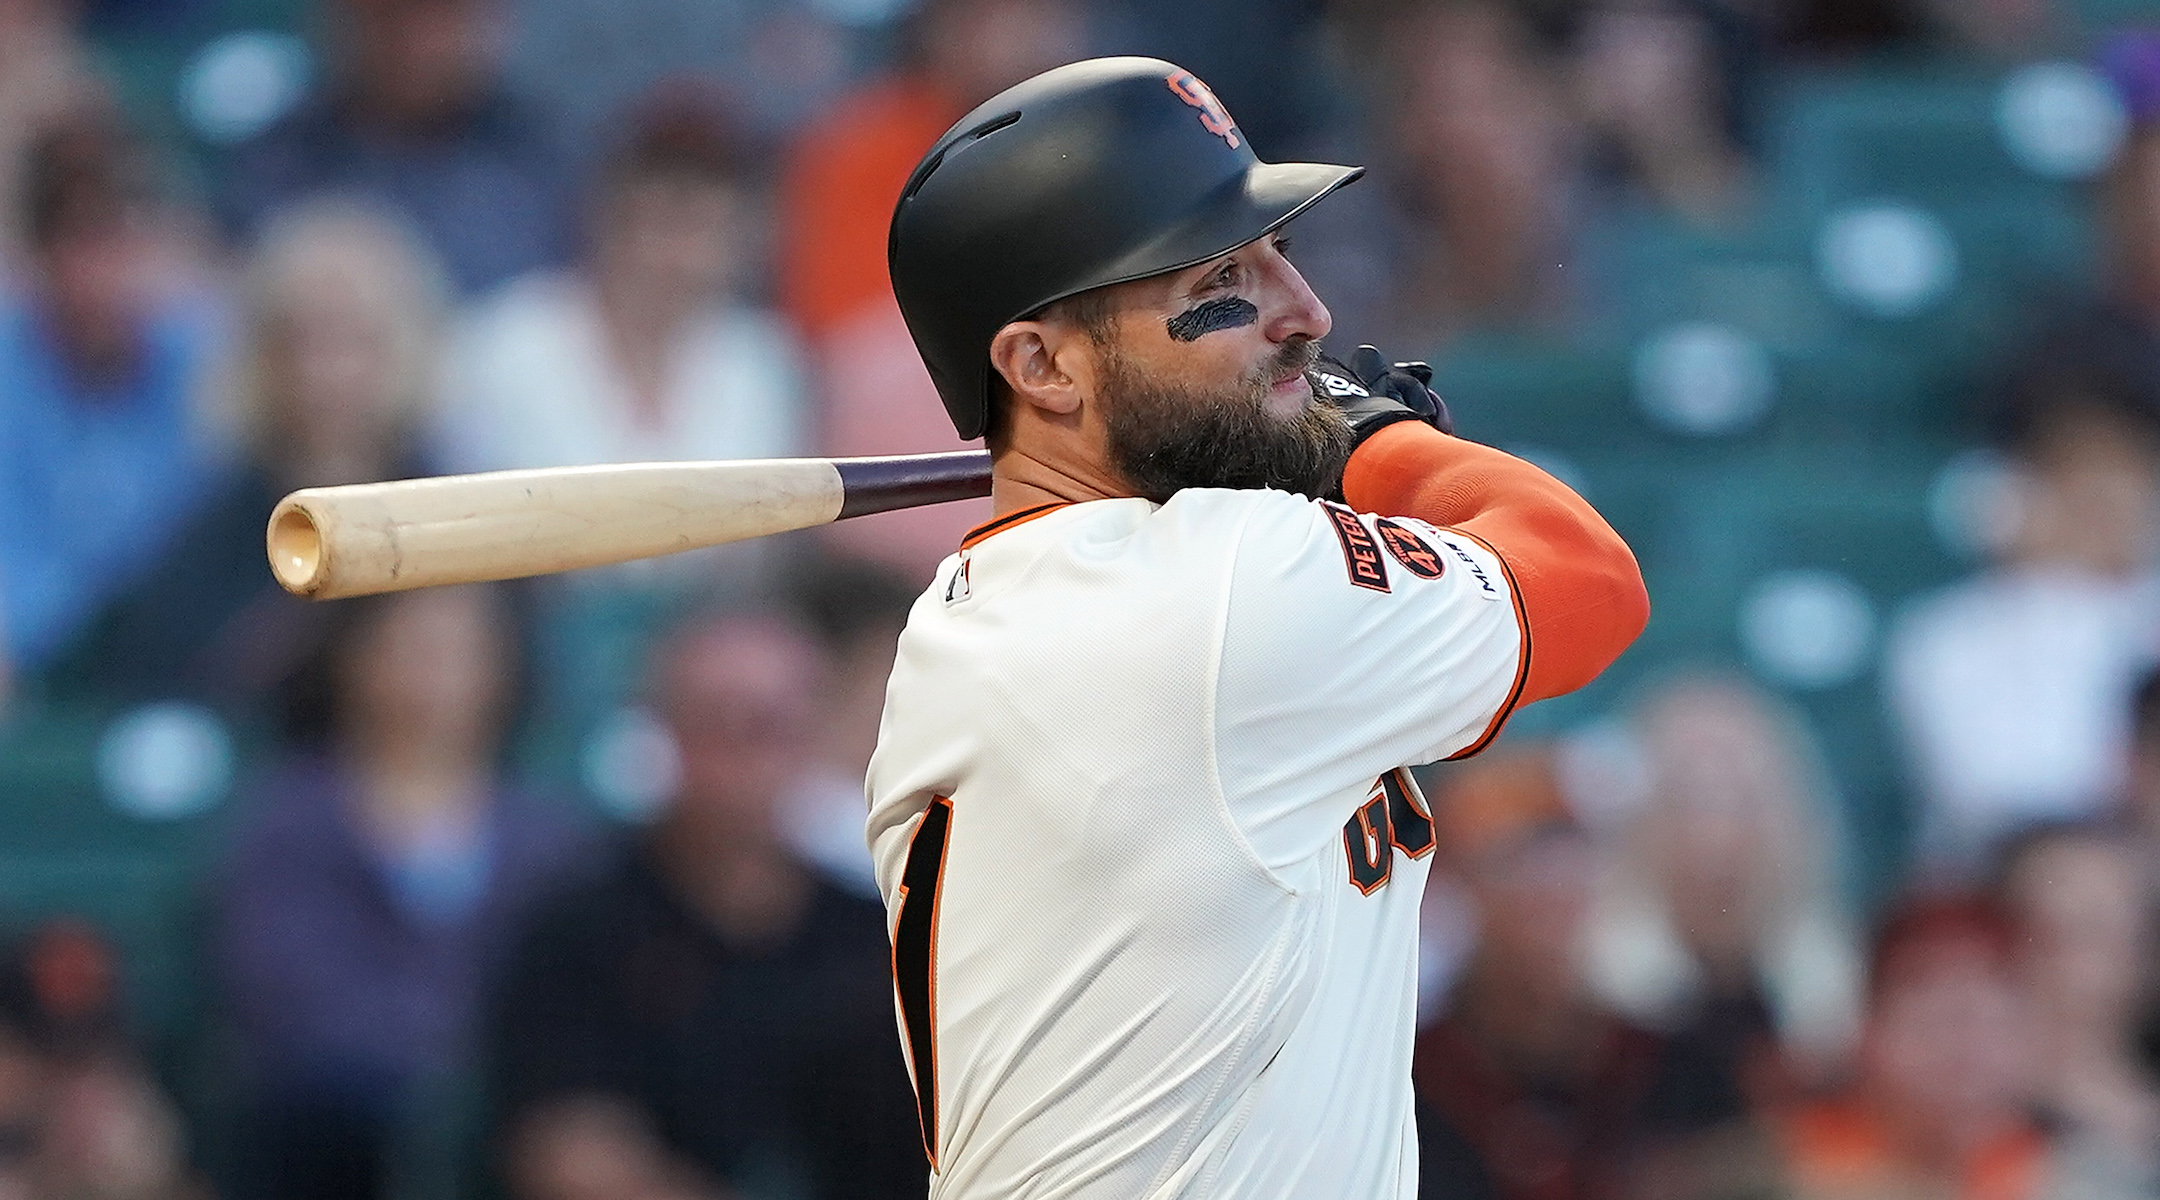 Giants acquire Kevin Pillar from Blue Jays - NBC Sports